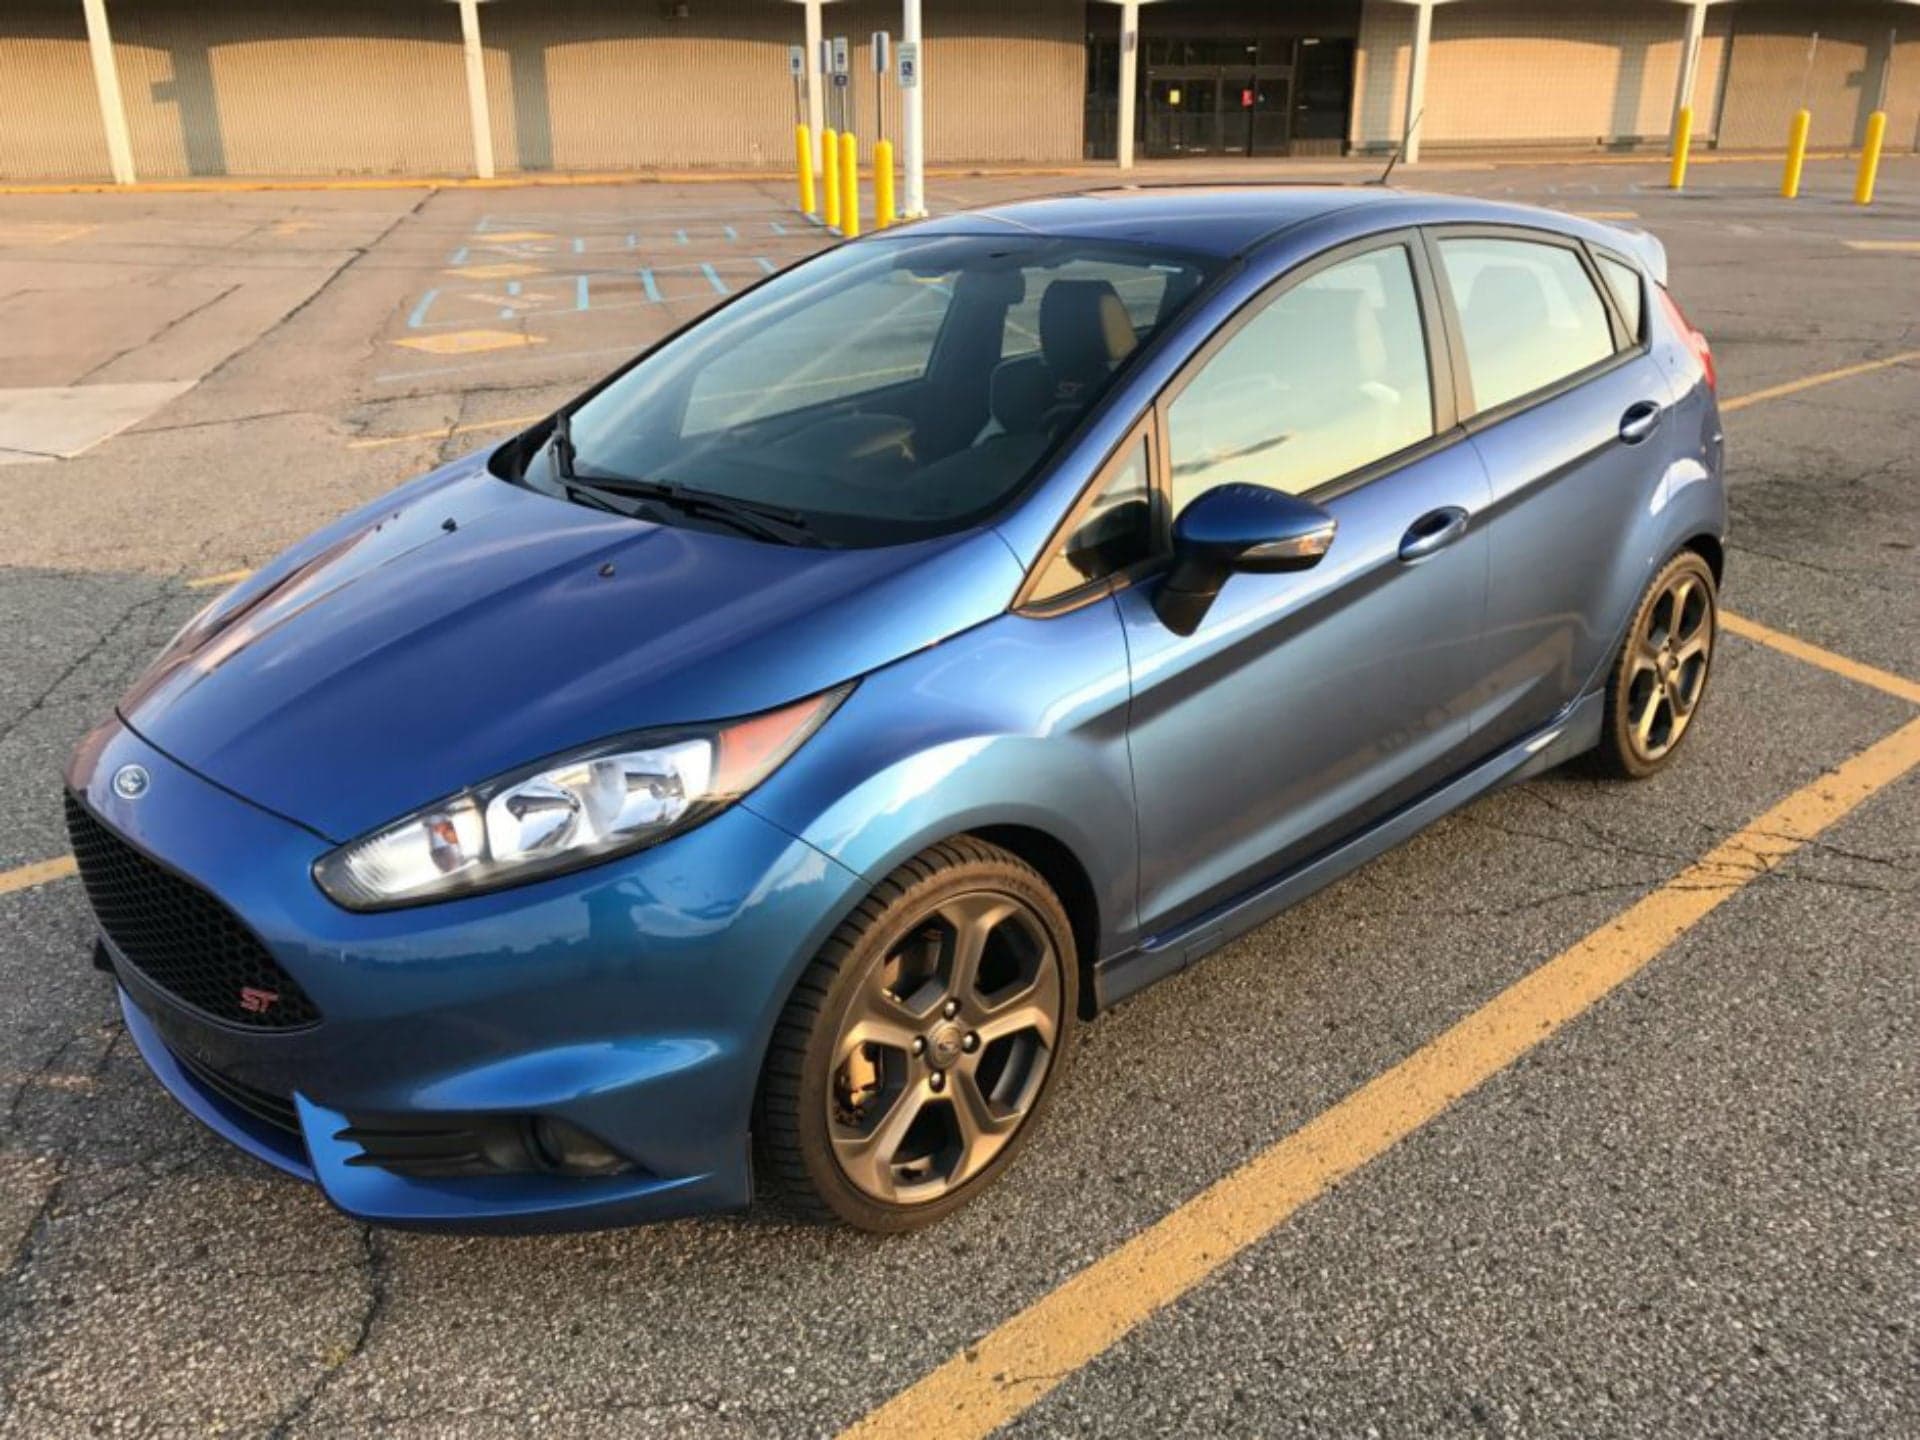 Now’s Your Chance to Own the Only Ford Fiesta ST Painted Like a Ford GT